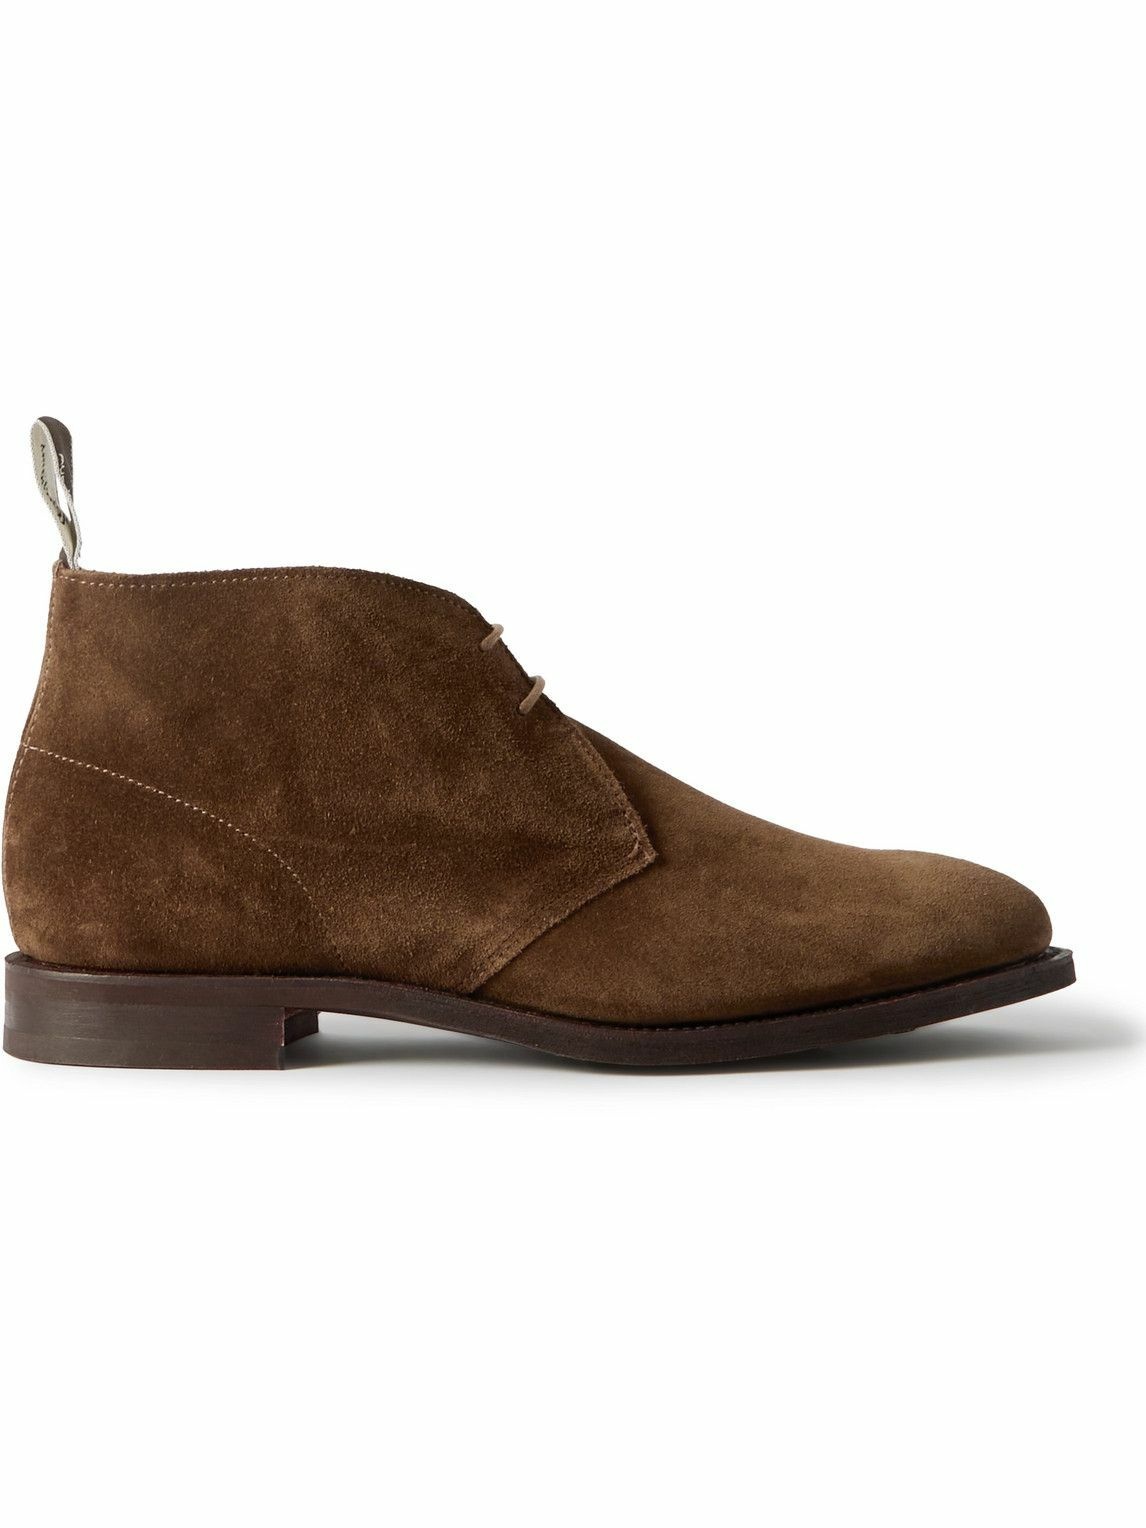 Photo: R.M.Williams - Kingscliff Suede Chukka Boots - Brown